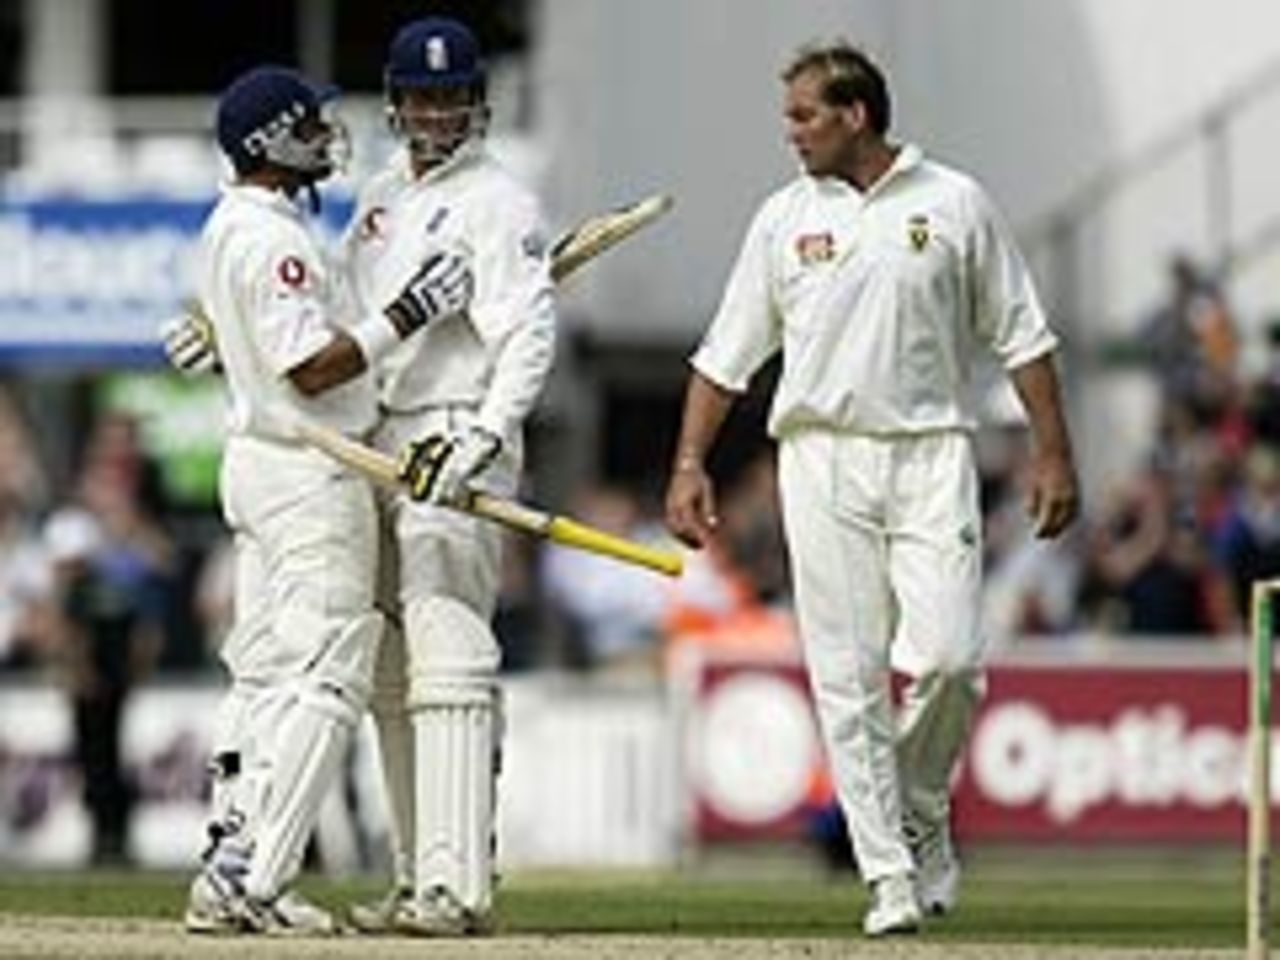 Marcus Trescothick and Mark Butcher celebrate the winning runs, England v South Africa, 5th Test, September 8, 2003